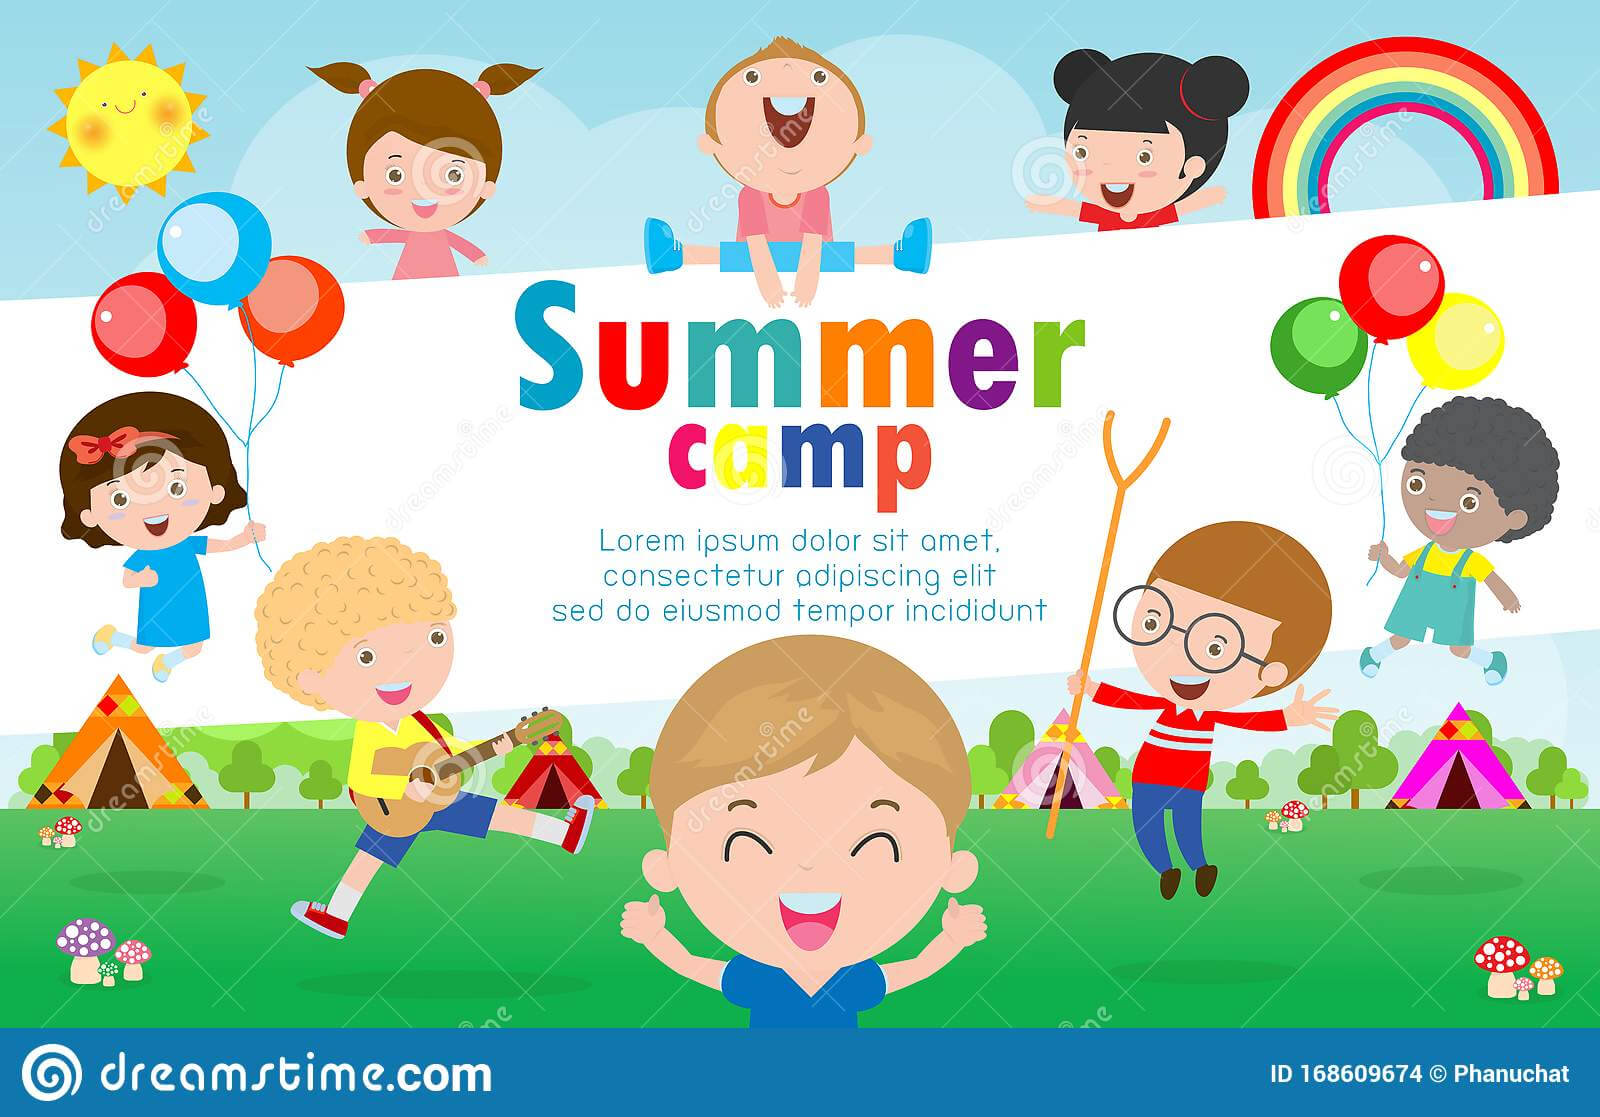 Kids Summer Camp Education Template For Advertising Brochure For Summer Camp Brochure Template Free Download